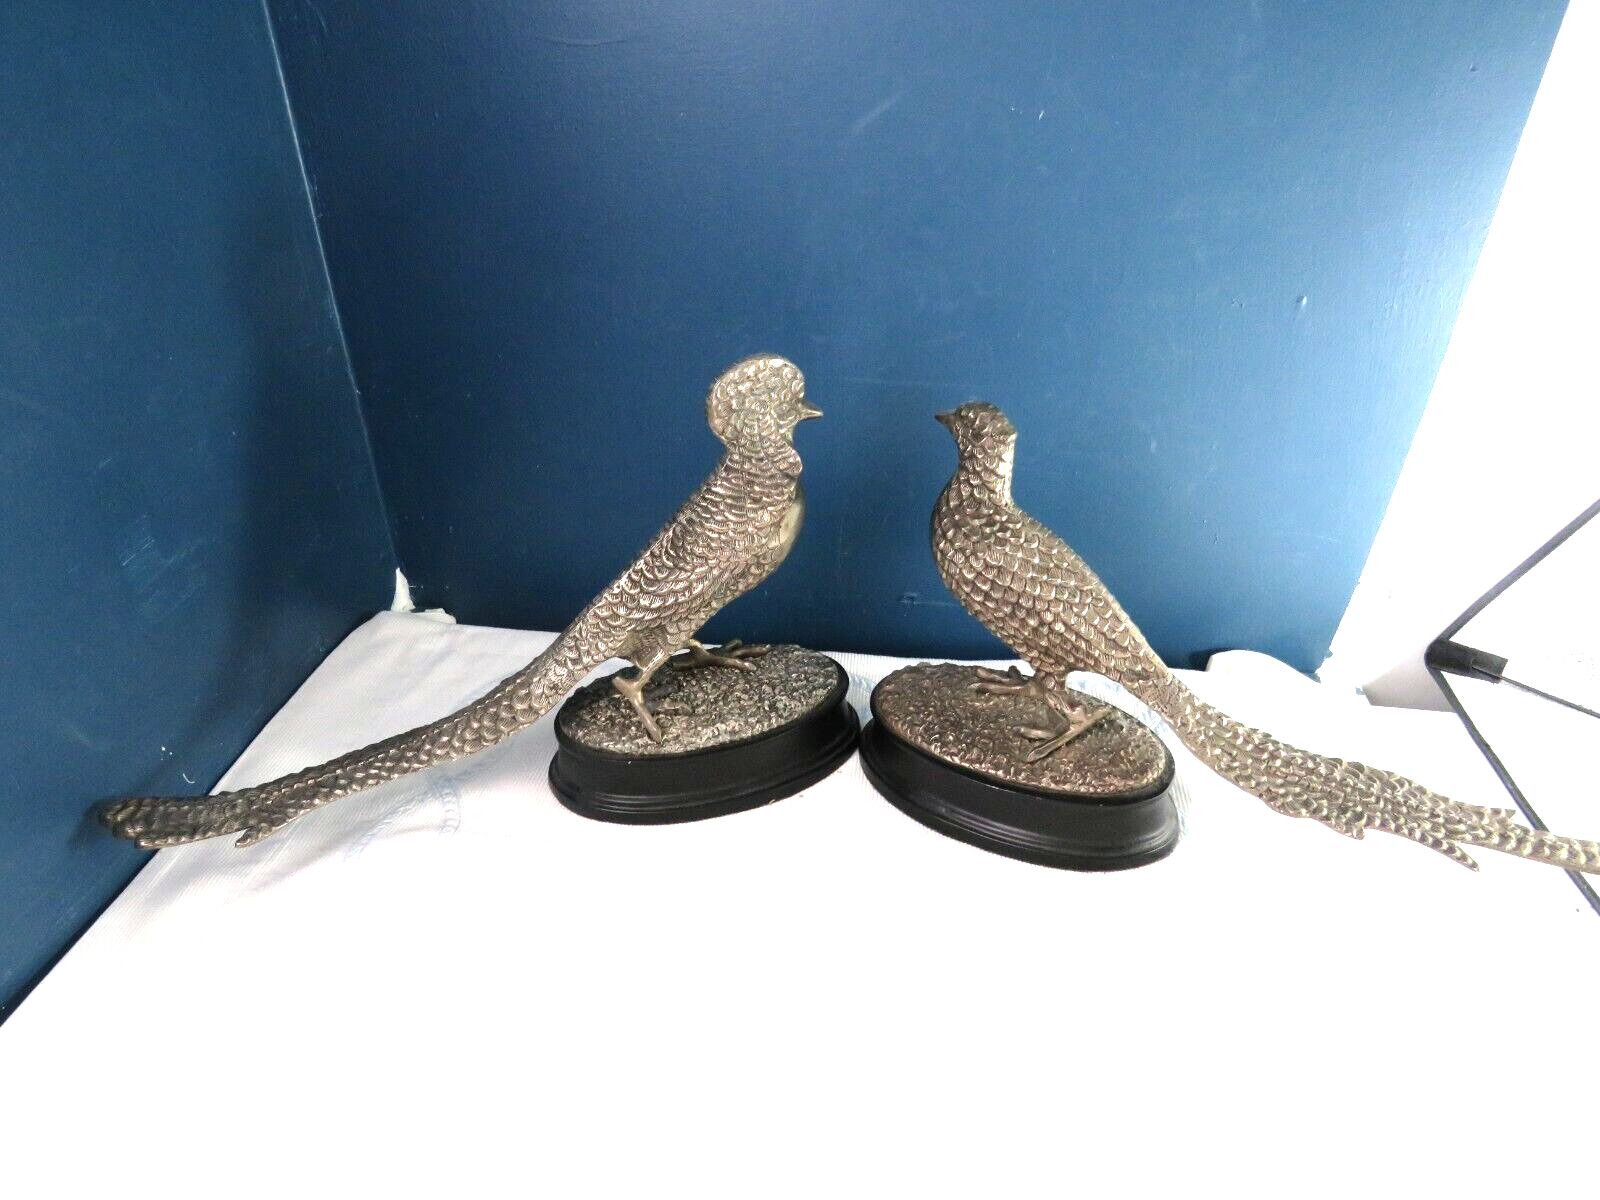 NICE PAIR~ PHEASANT SCULPTURES ~BRONZE SILVER PLATED FINISH 